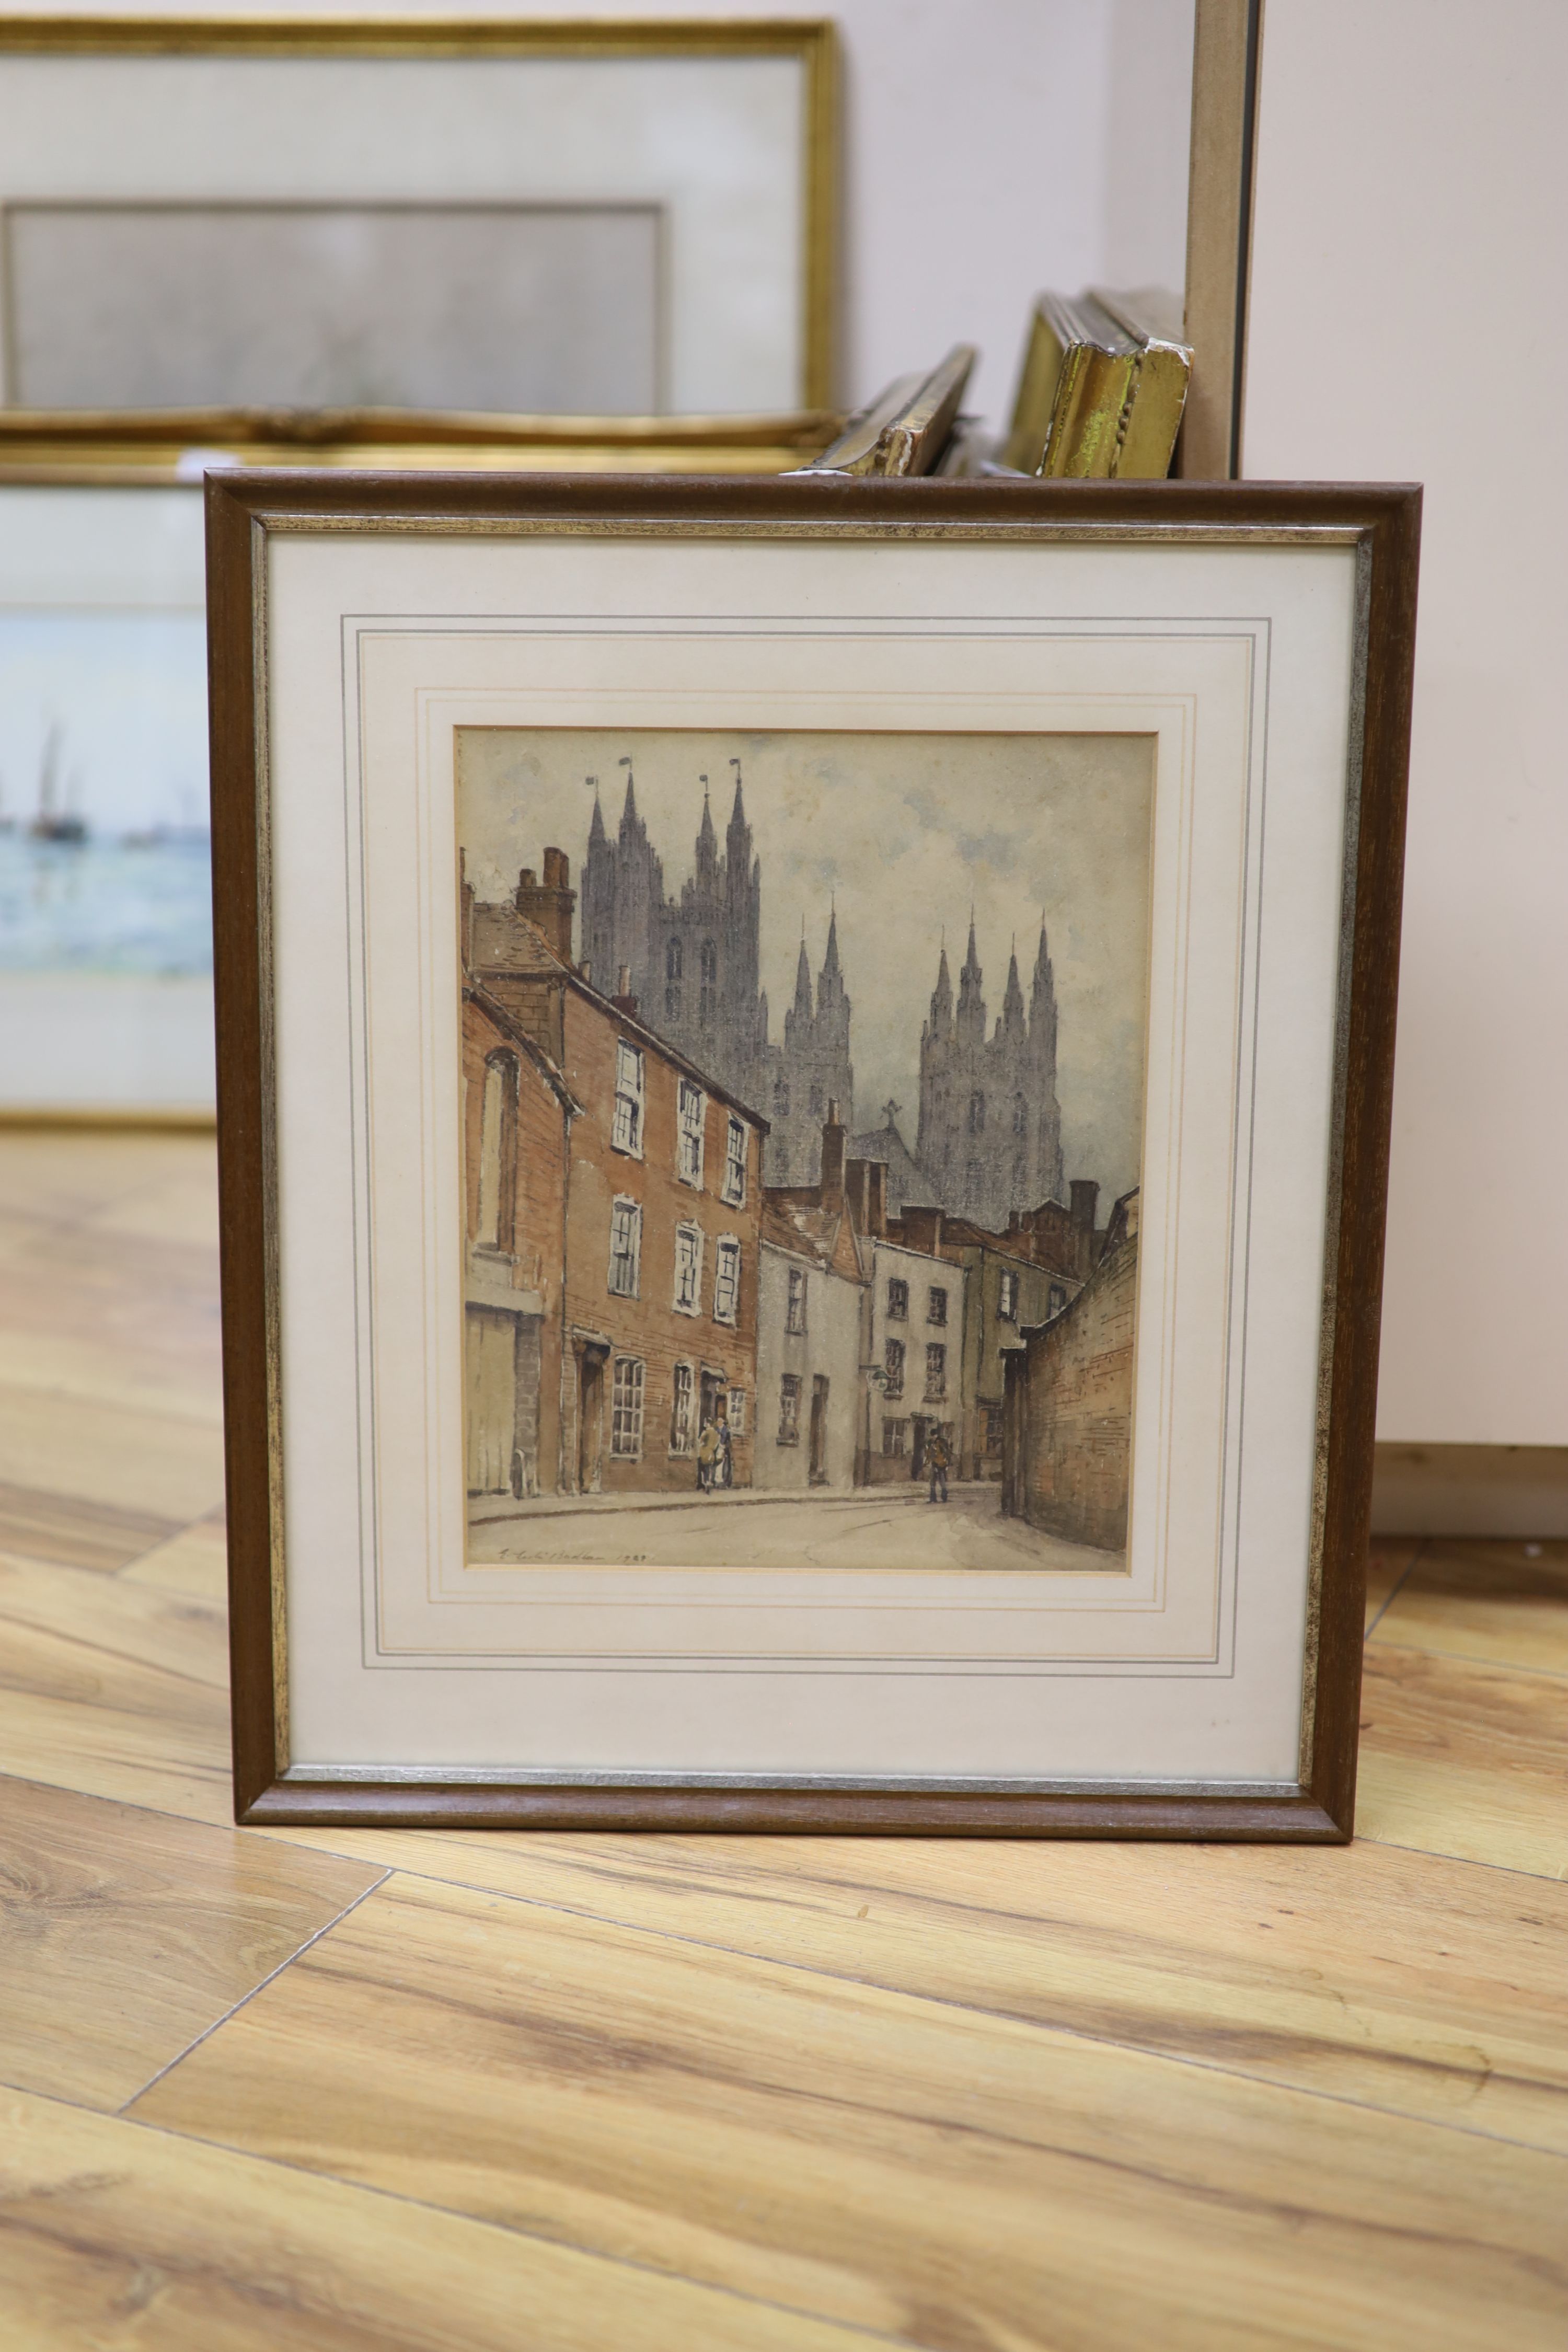 Edward Leslie Badham (1873-1944), watercolour, Cathedral town street scene, signed and dated 1929, 28 x 22cm